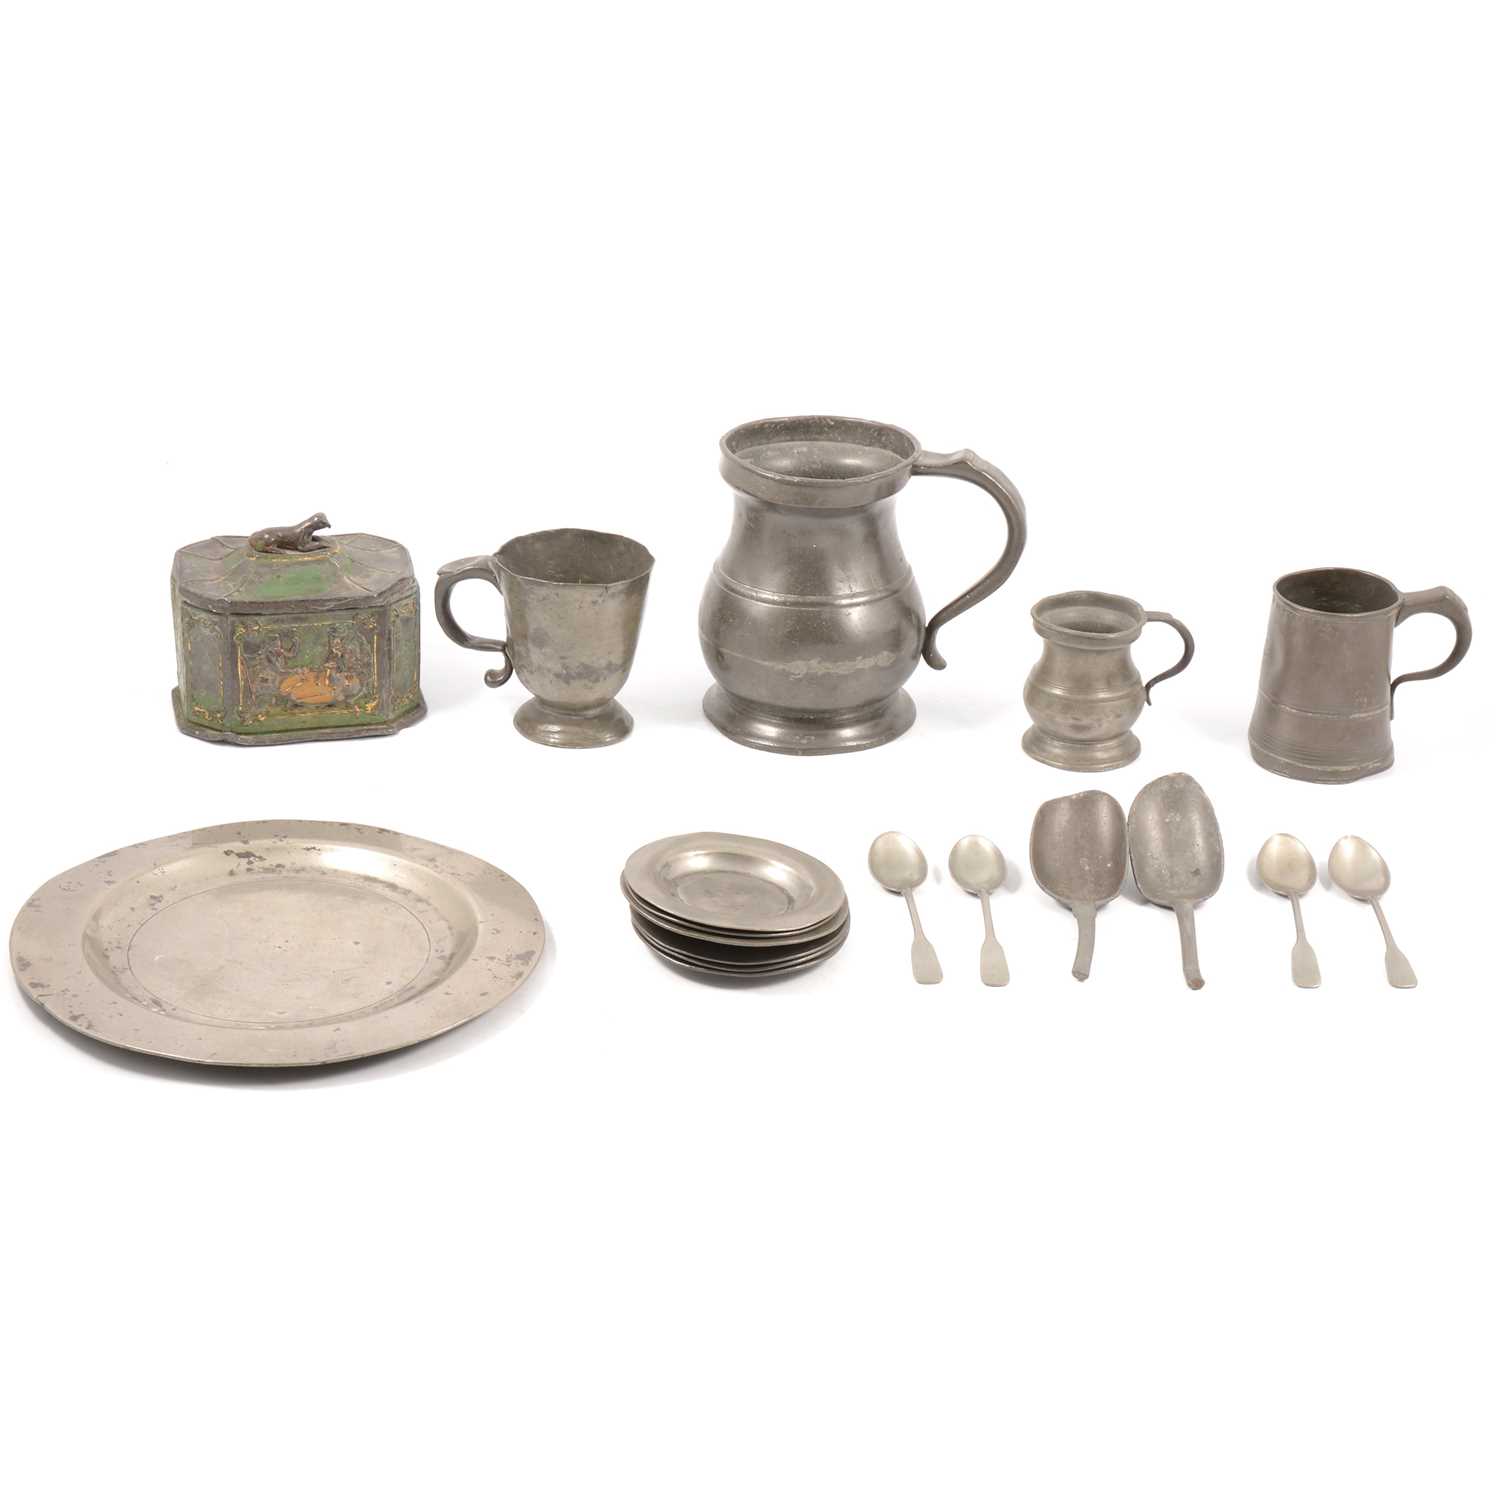 Lot 13 - Lead tobacco box and pewter ware